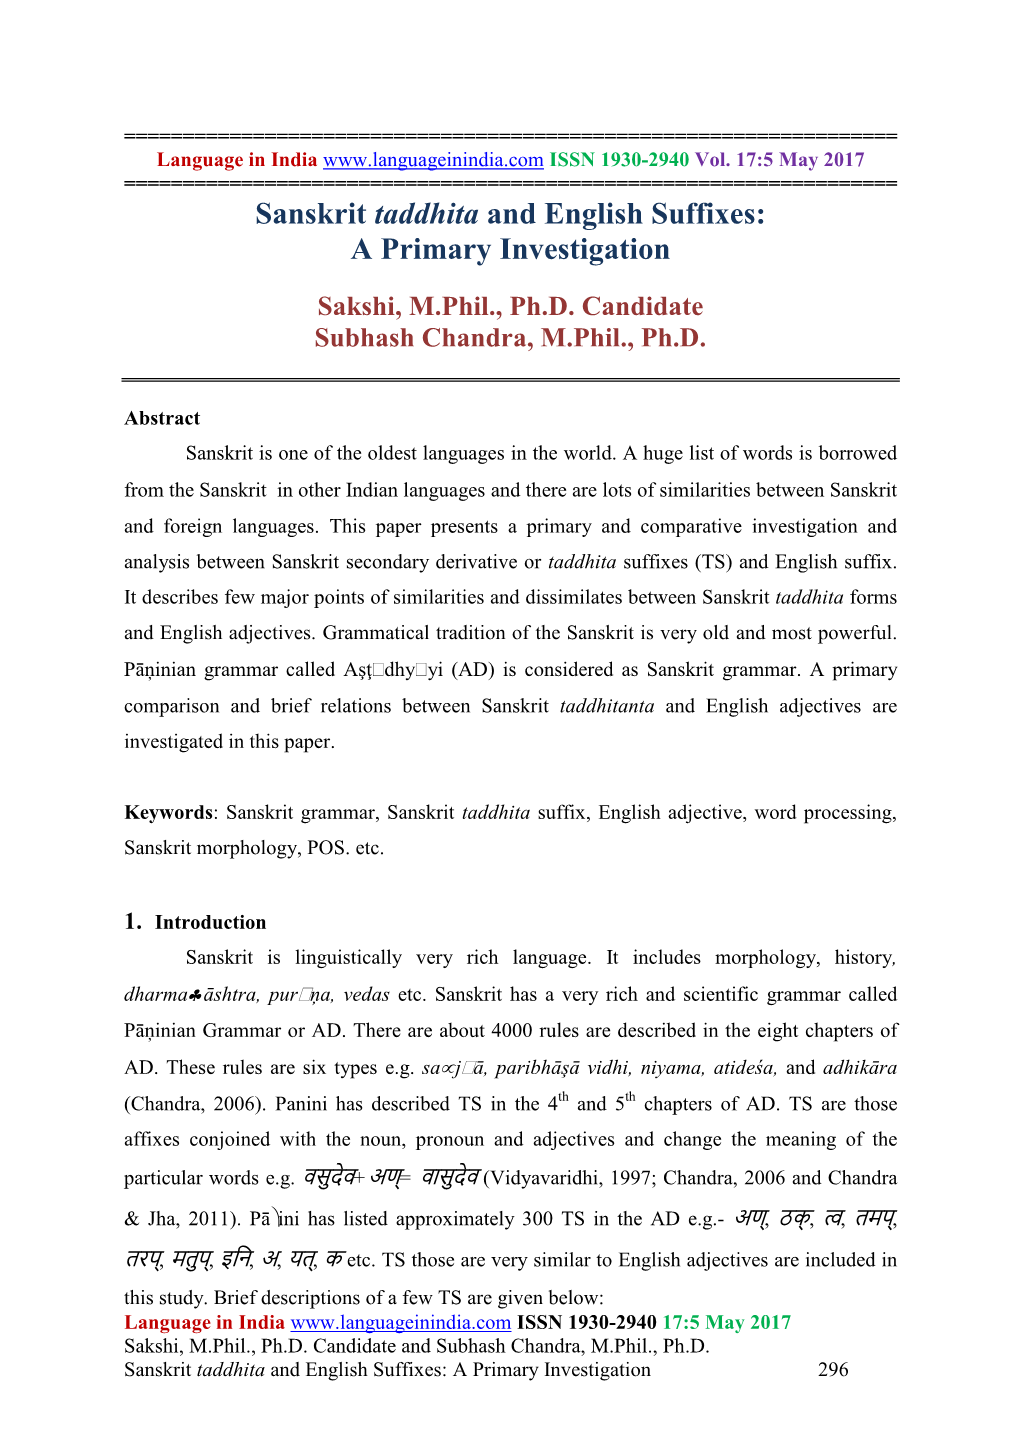 Sanskrit Taddhita and English Suffixes: a Primary Investigation